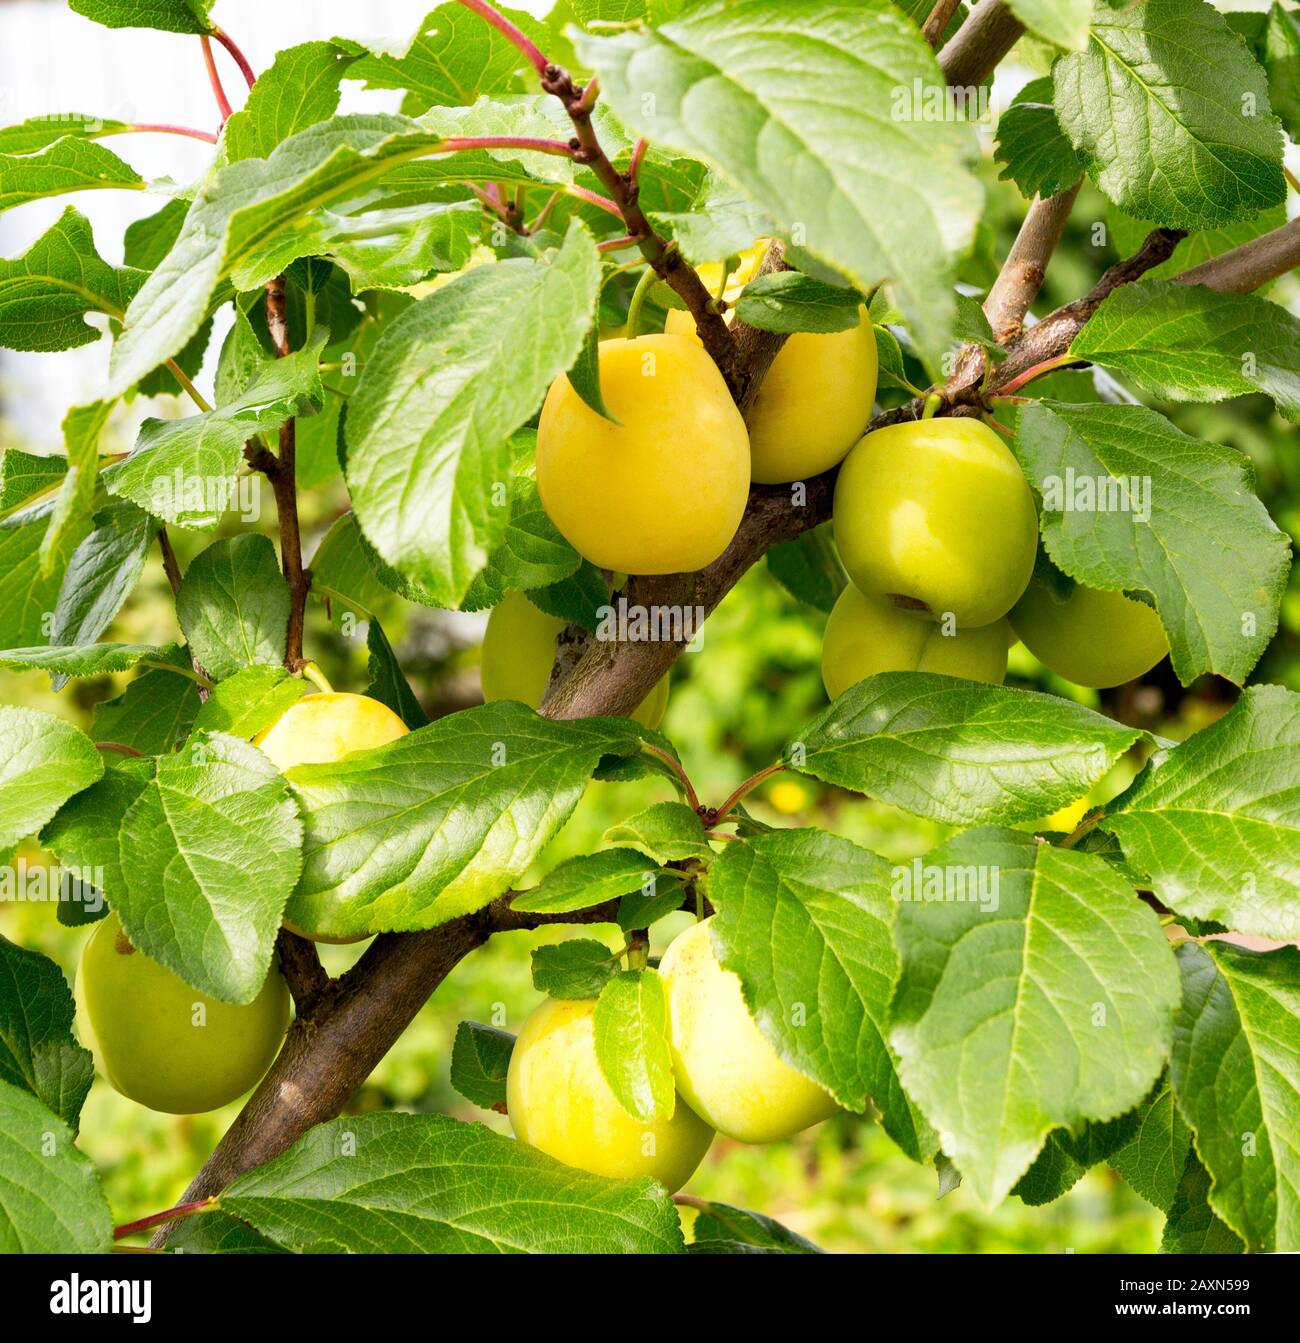 Plum tree with ripe plum fruit. Branches with juicy fruits on sunset light. Close up of the plums ripe on branch. Organic plums tree in an orchard. Stock Photo